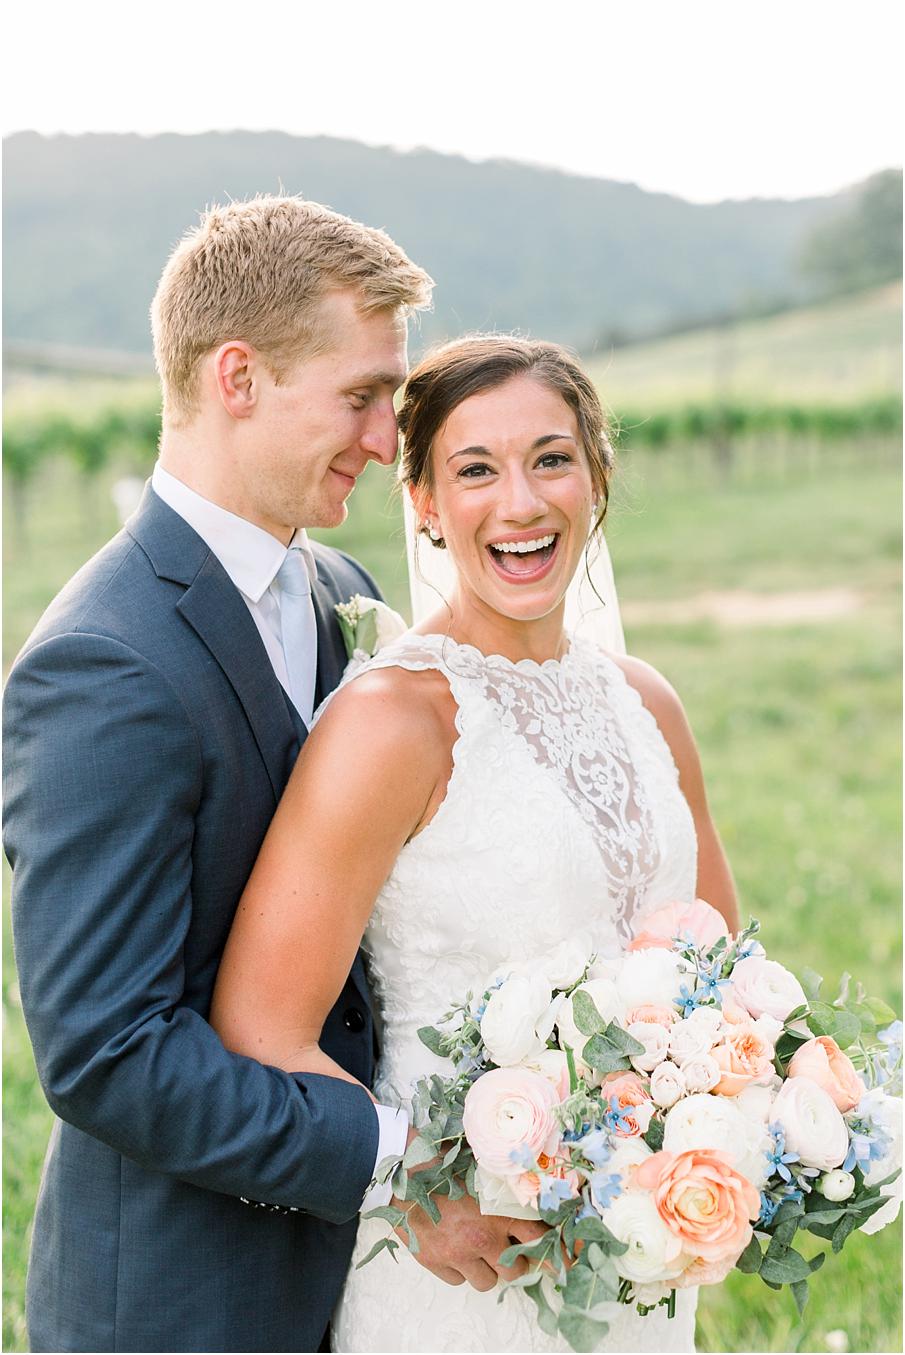 A joyful bride and groom laughing and being silly after their Veritas winery wedding